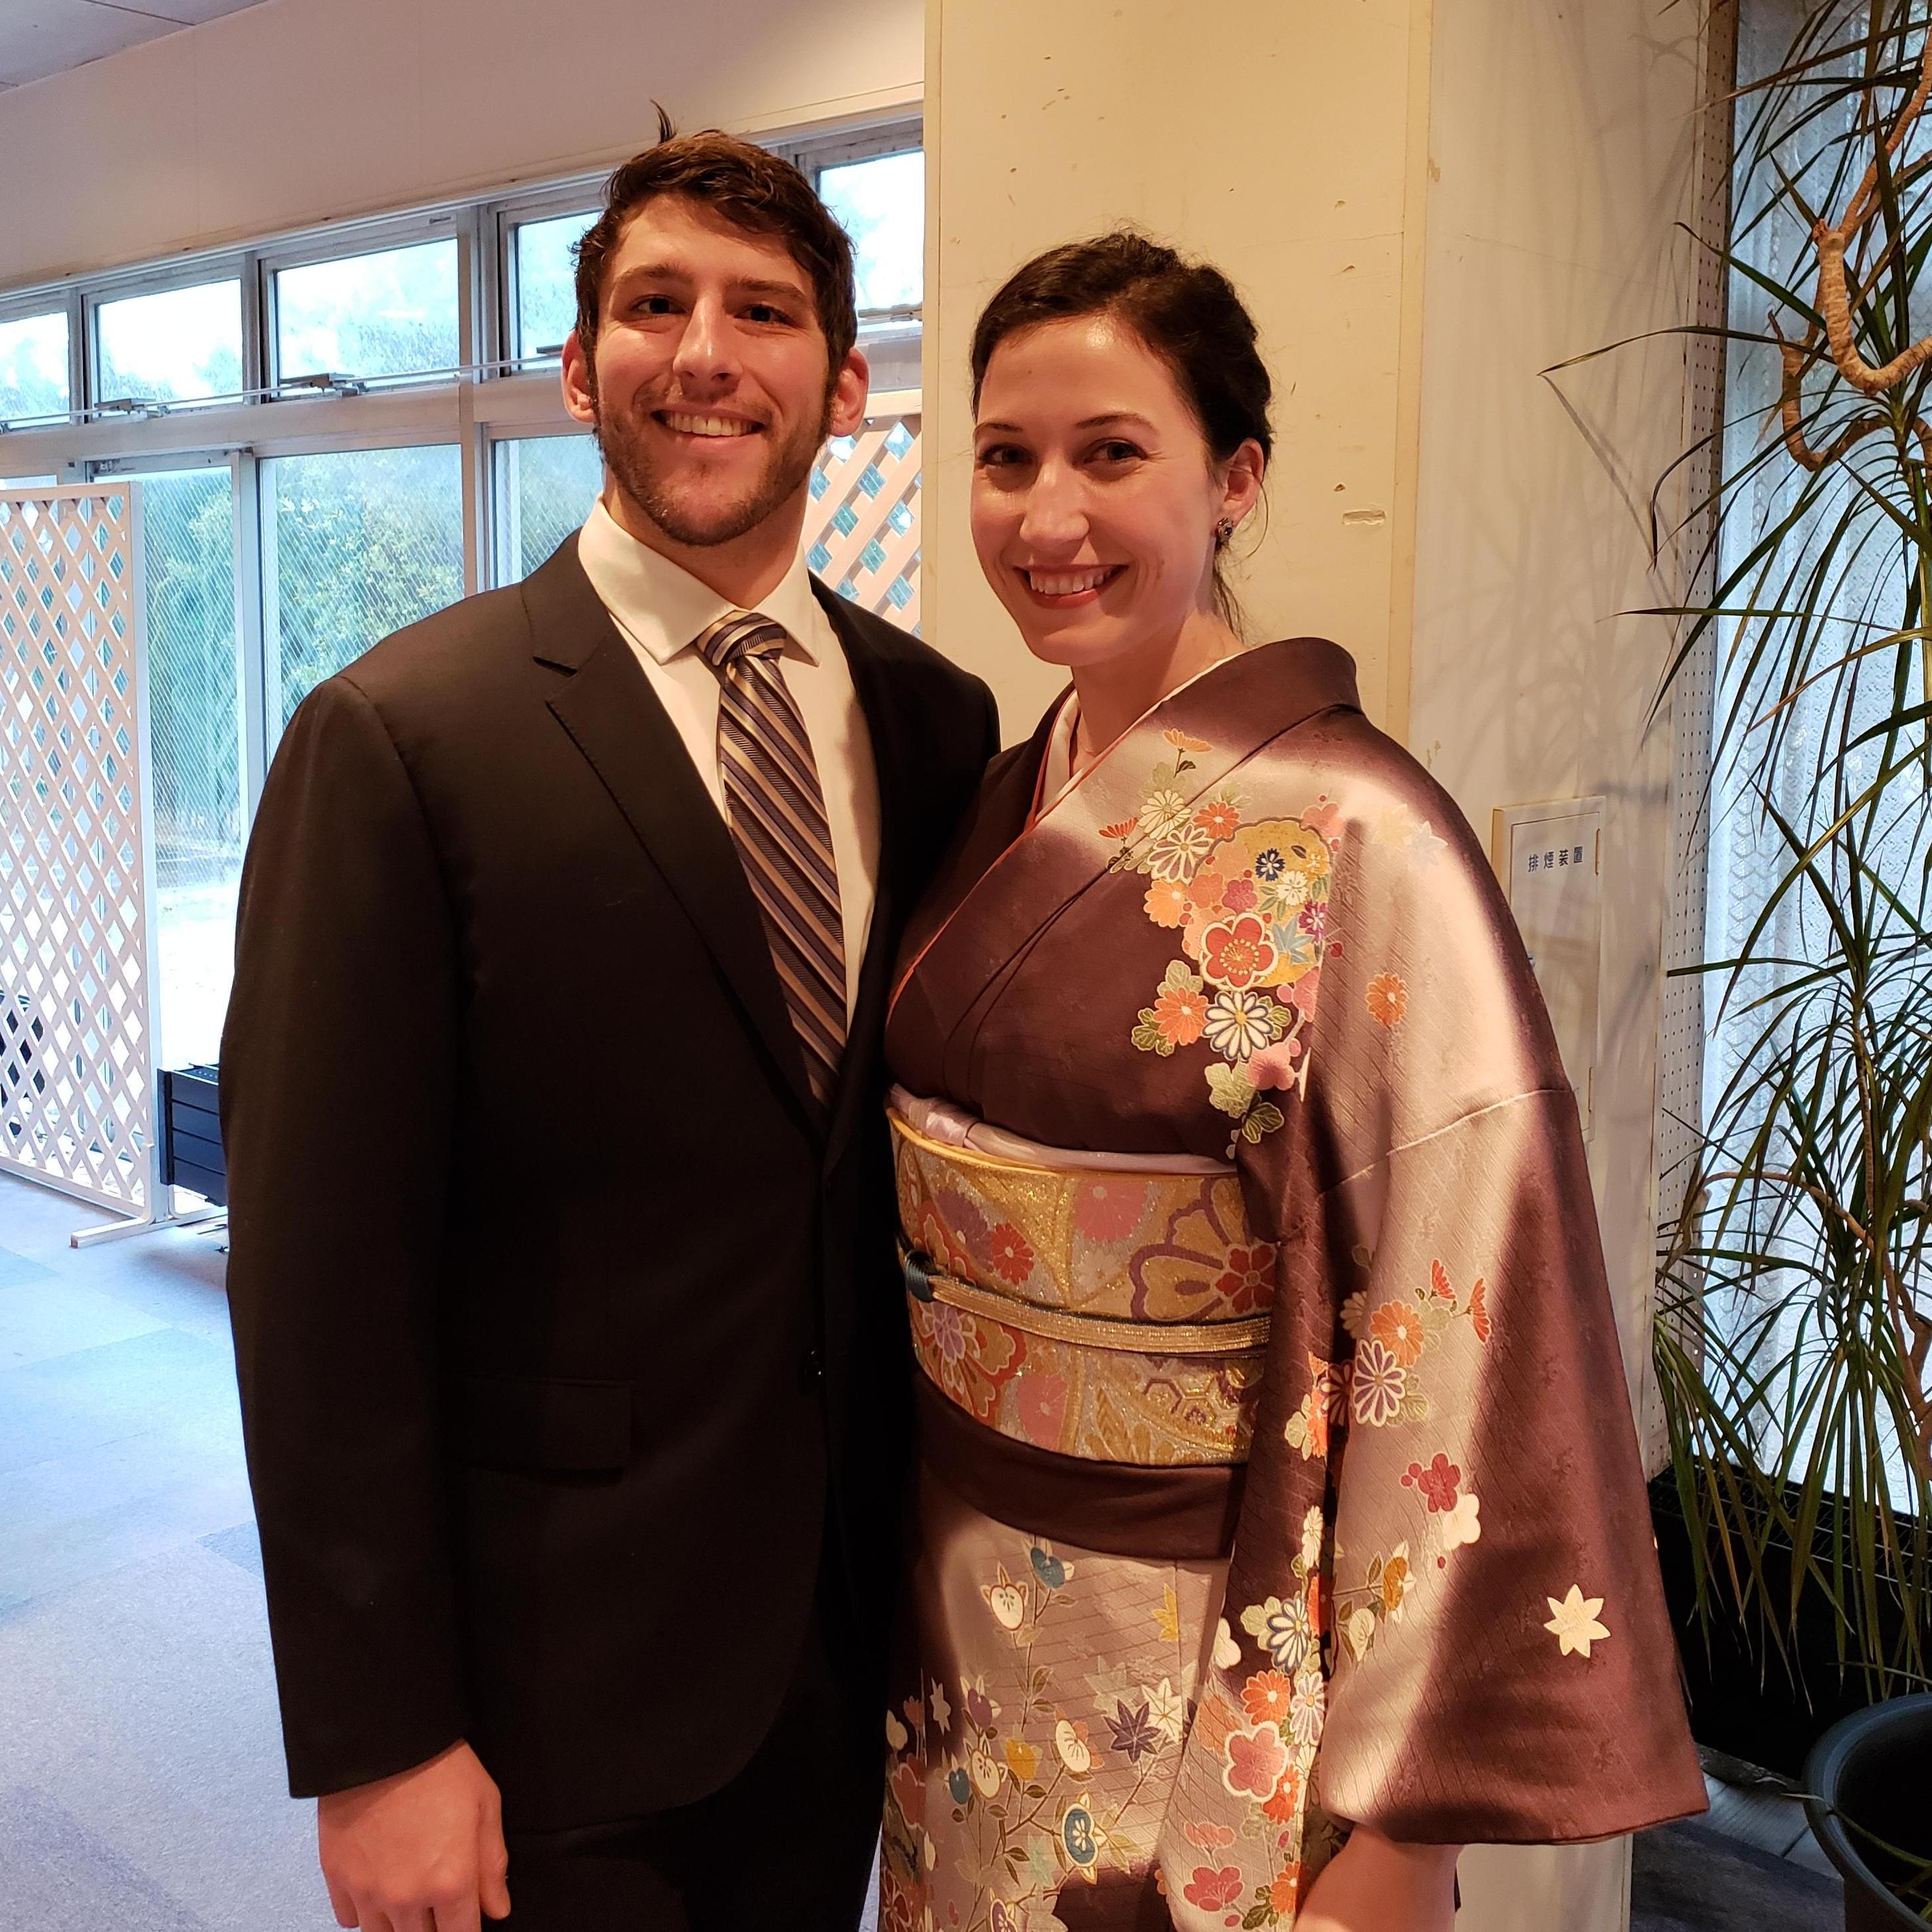 Dressed up for Mari's wedding in Japan!